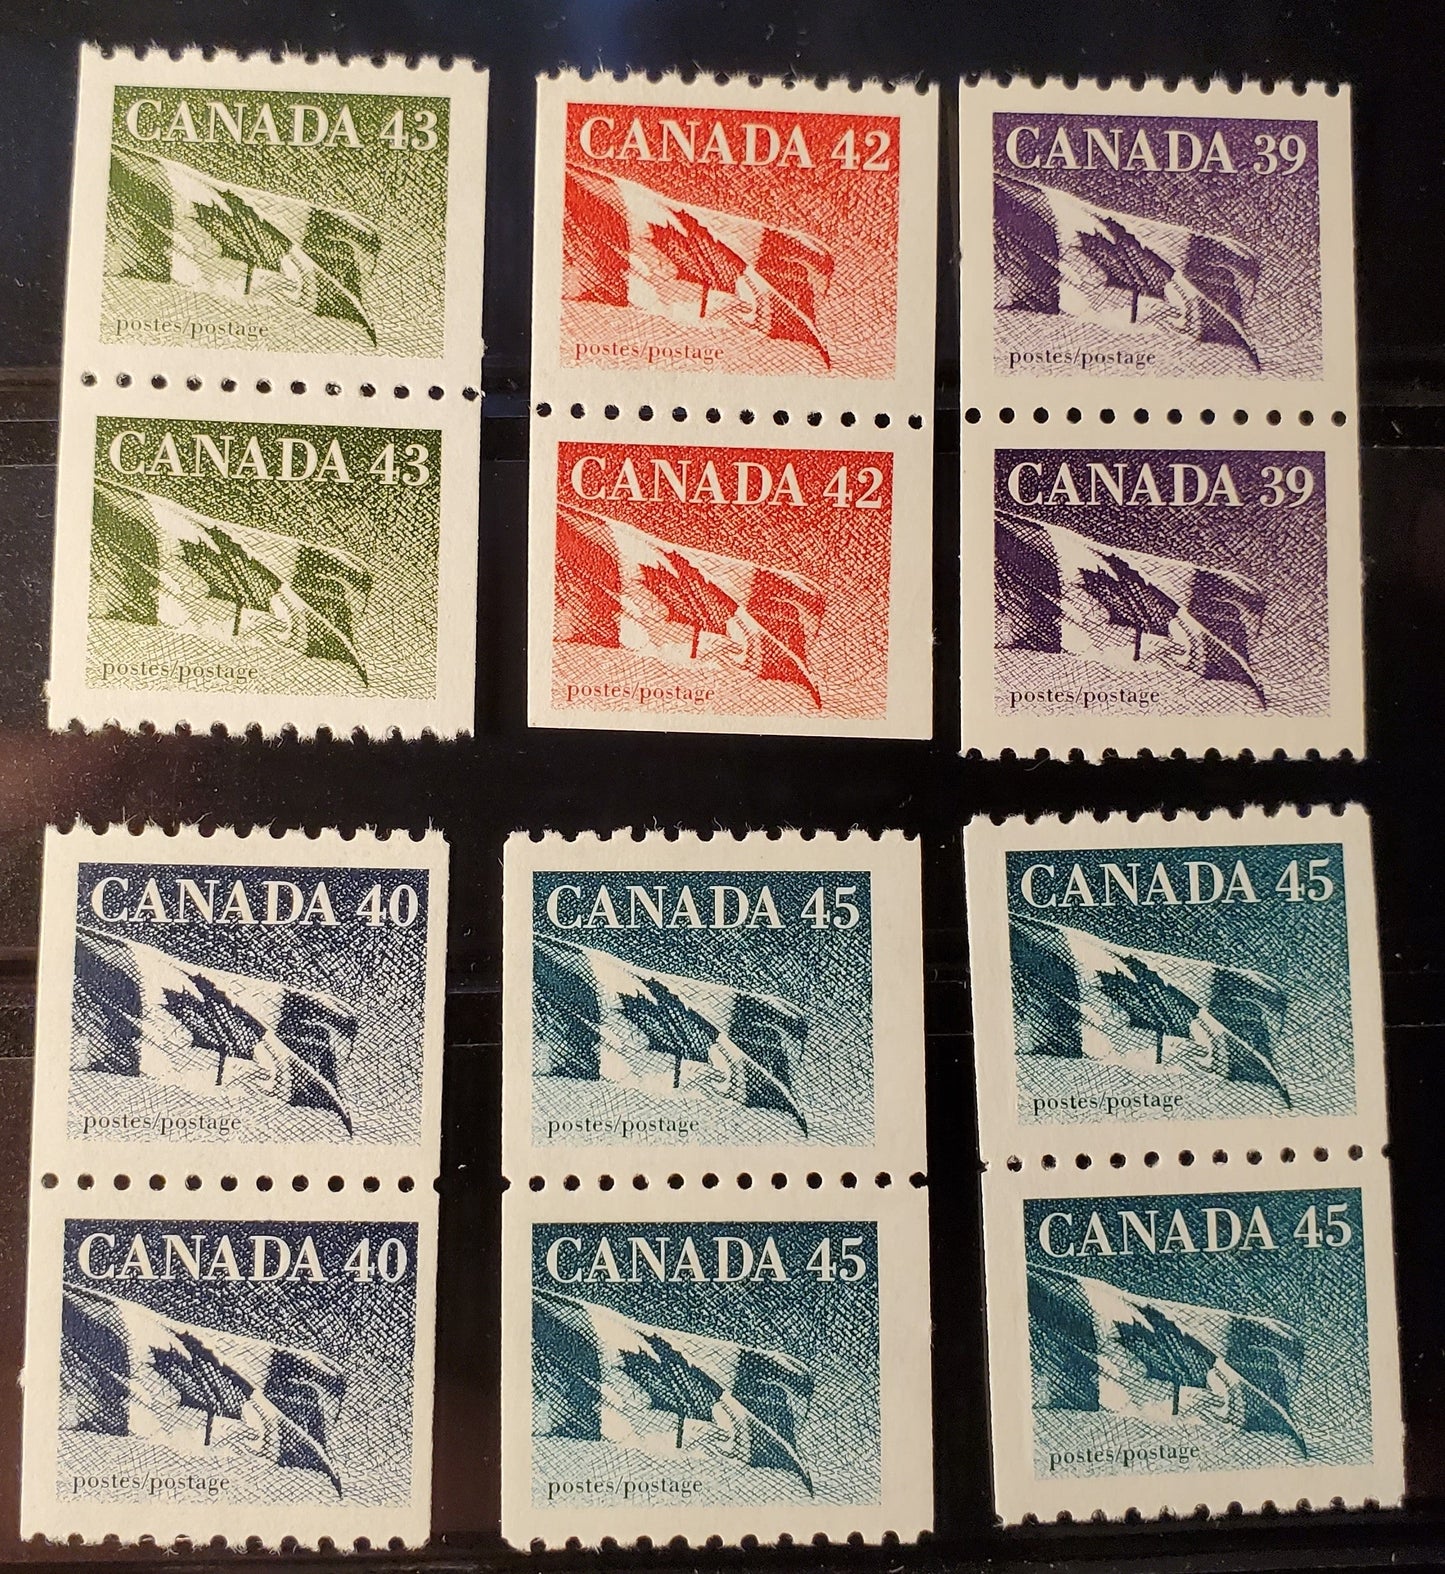 Lot 276 Canada #1194B-C, 1394-1396, 39c - 45c Flags, 1988-1991 Fruit and Flag Issue, 6 VFNH Coil Pairs, All Different Papers